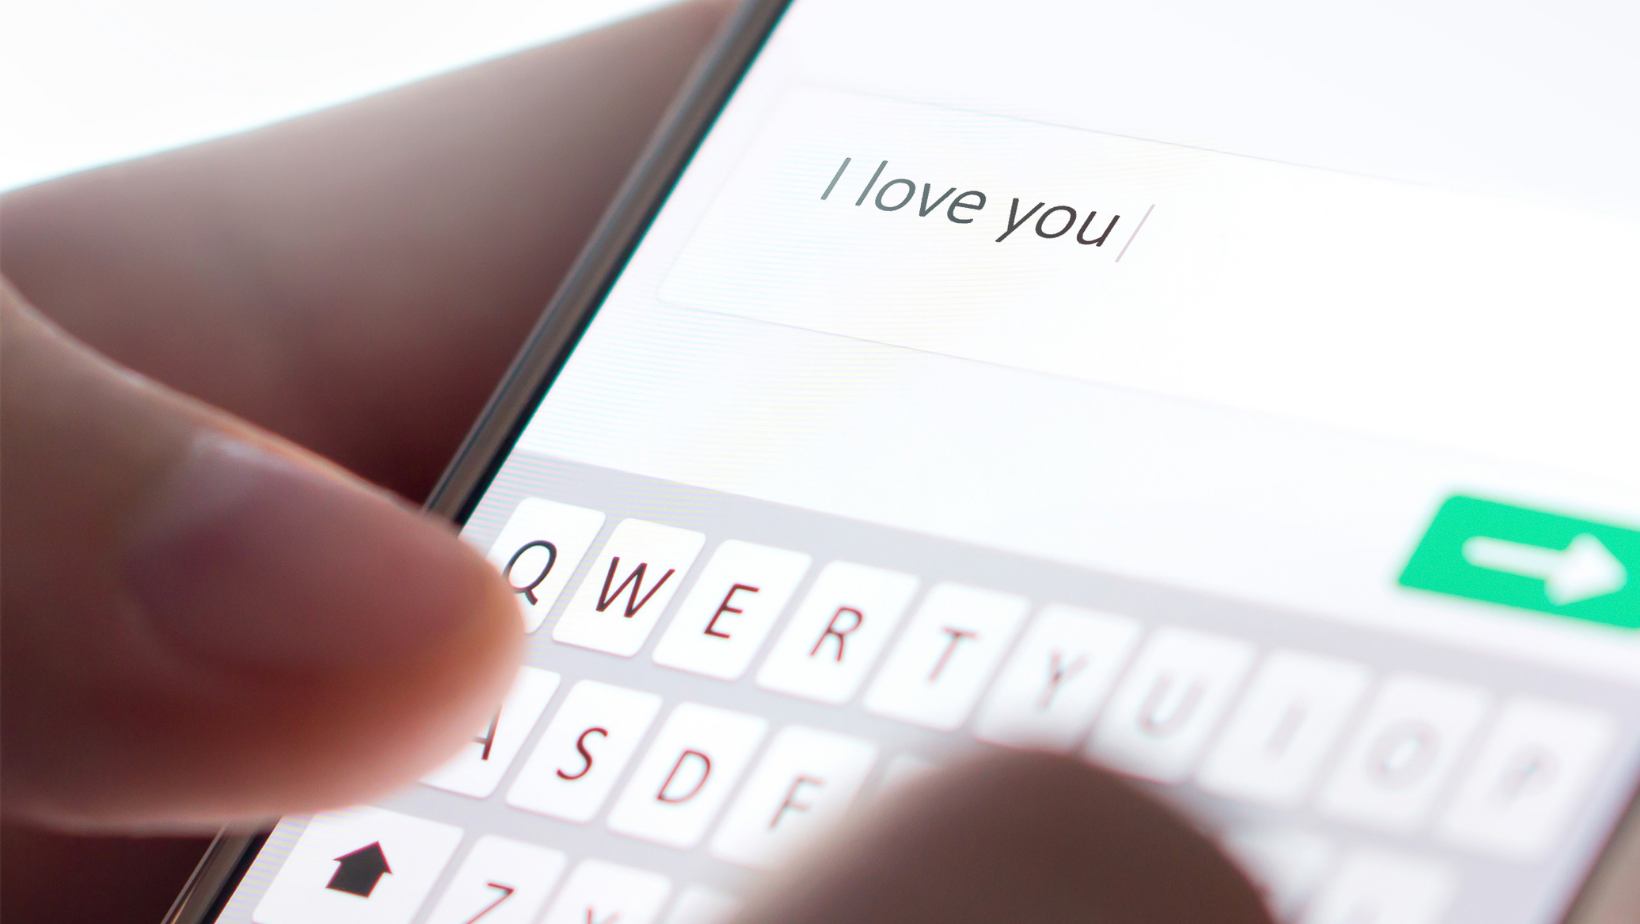 Texting I love you on touch screen phone